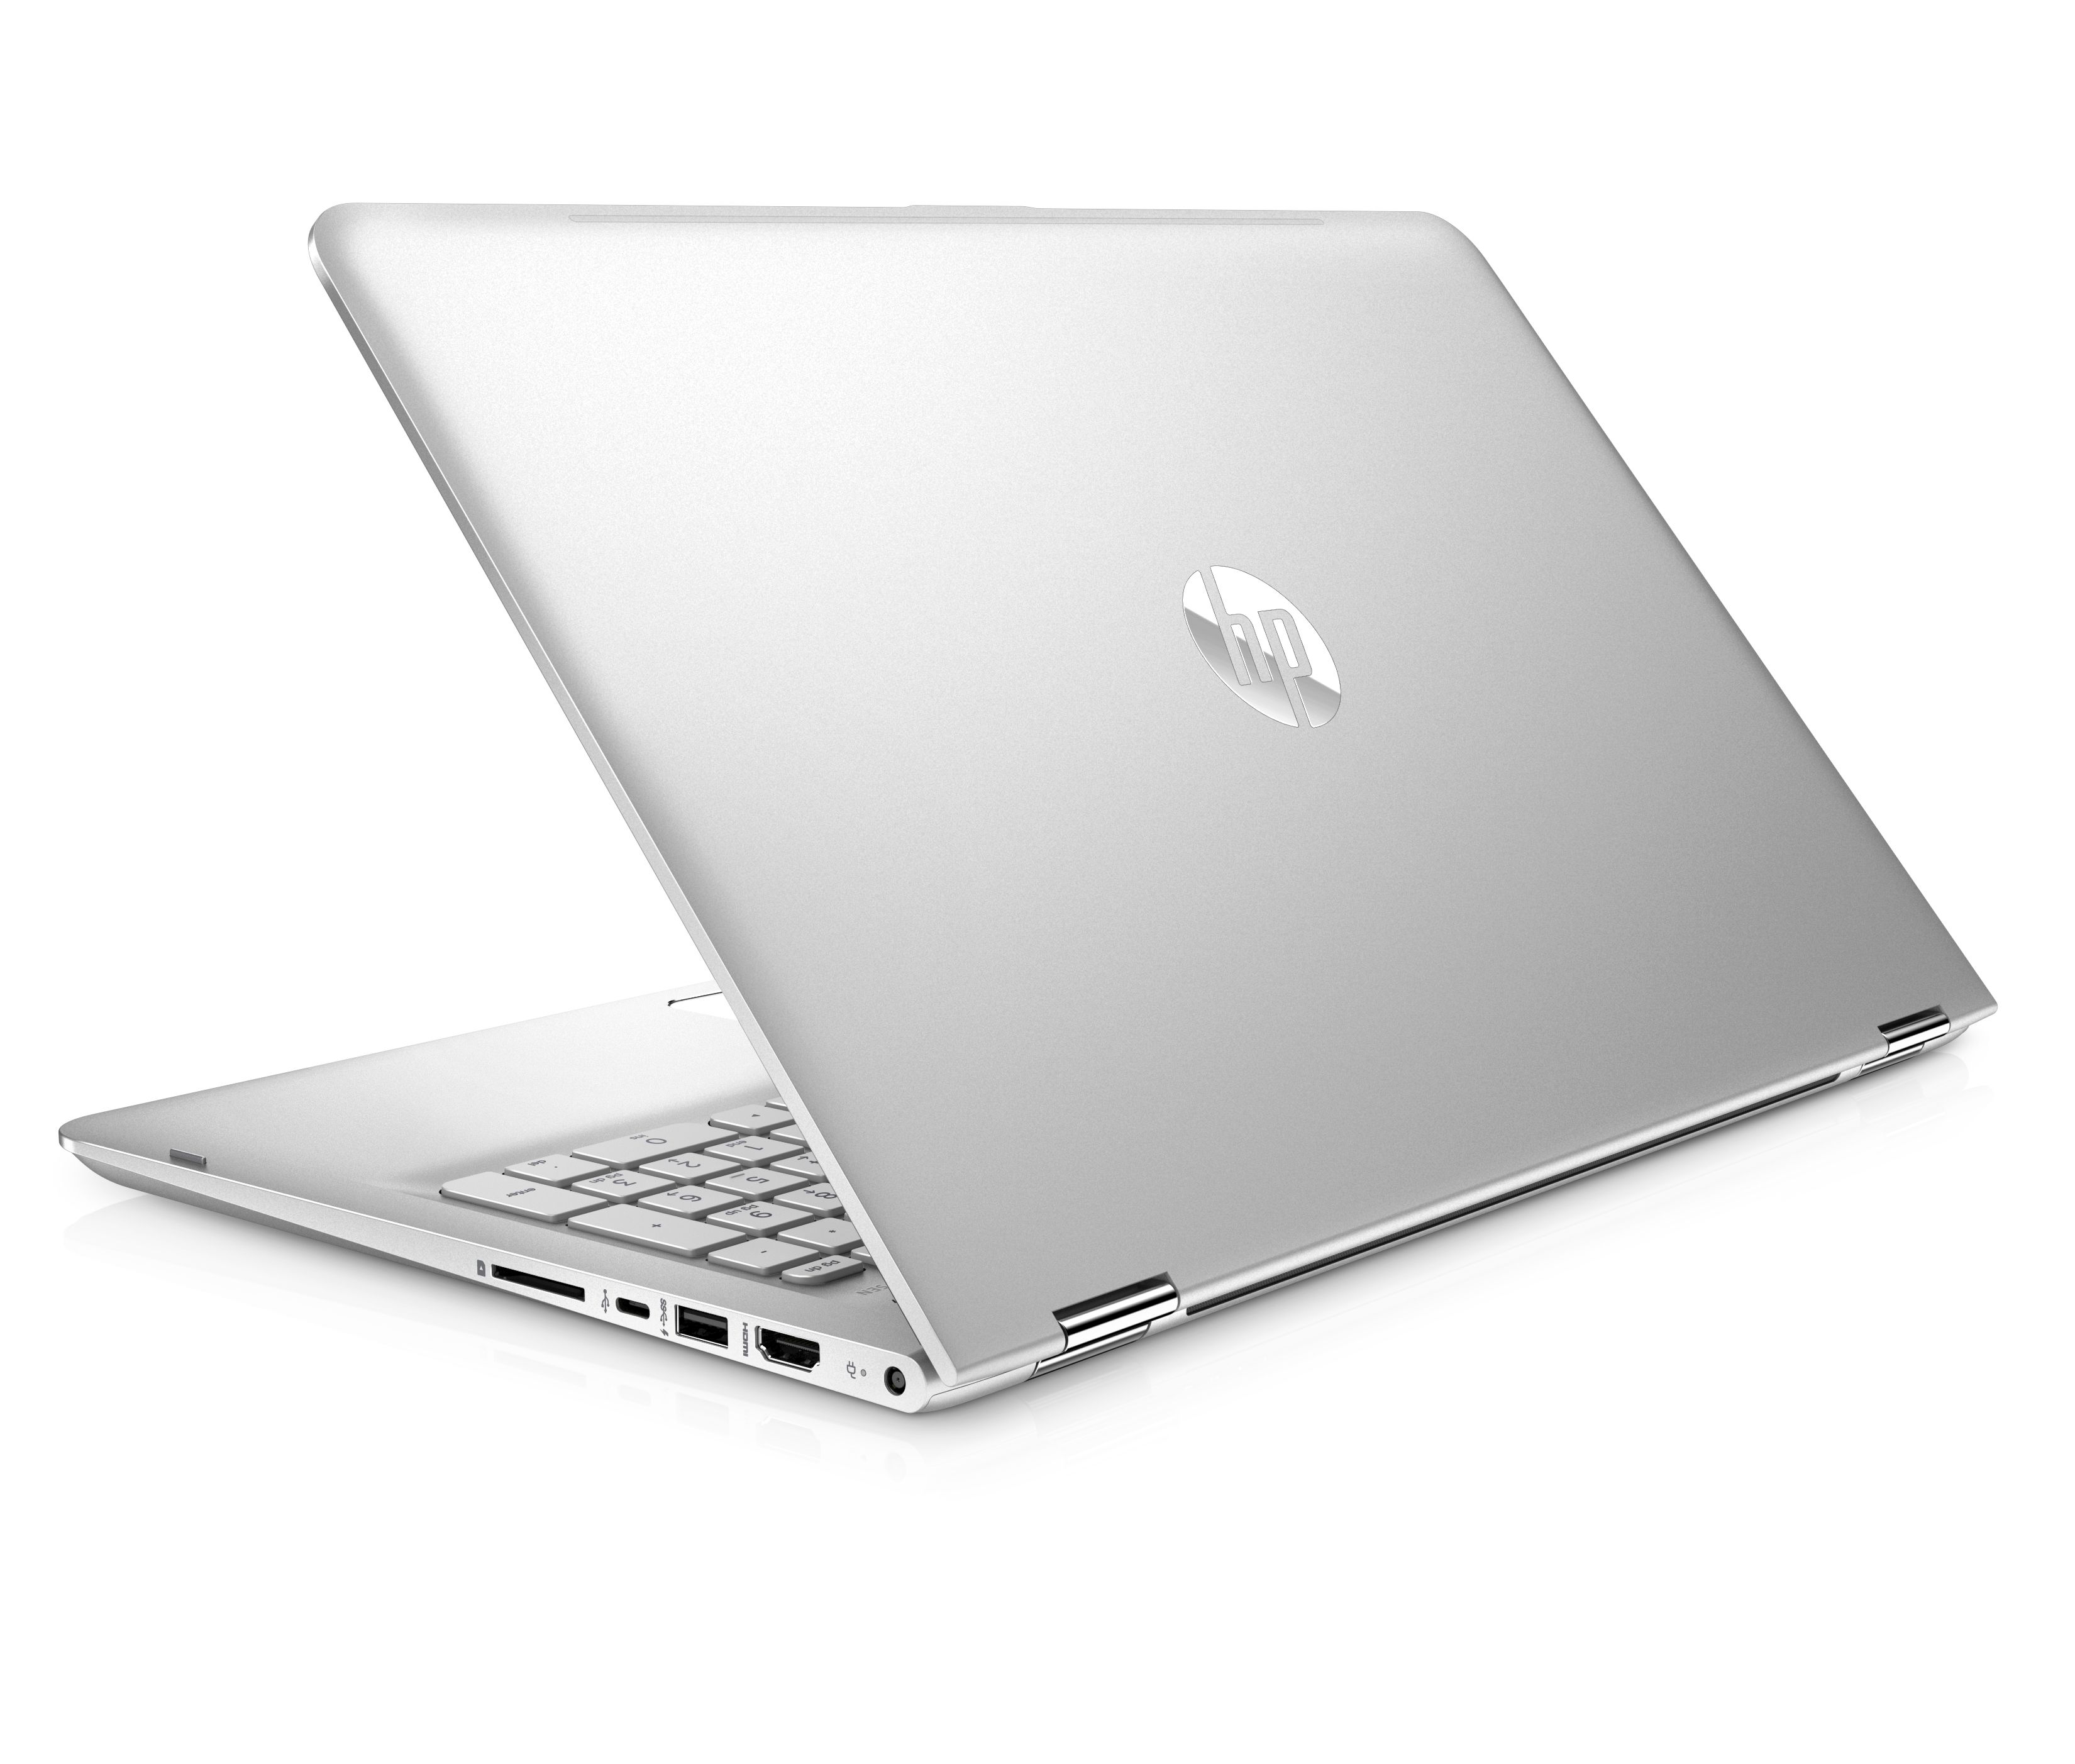 hp envy laptops updated with 4k thinner design and more image 1